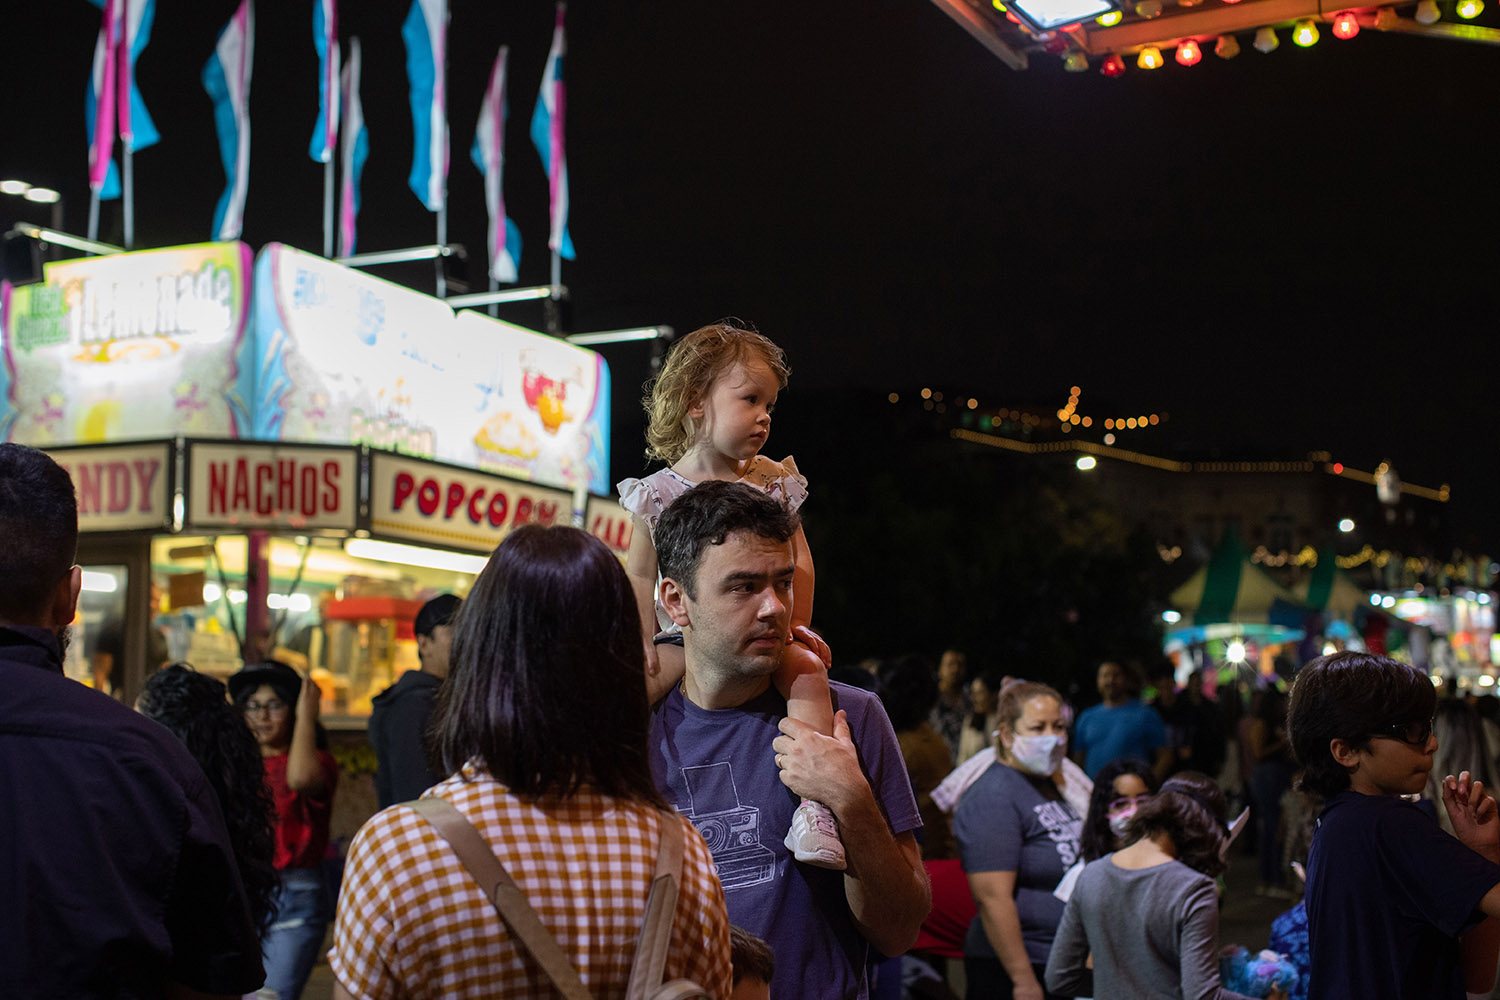 Thousands of people attended the Celebrate SA — the city’s official New Year’s Eve gathering in downtown on Dec. 31, 2021. Dozens of food vendors were set up between a couple of music stages and classic fair games. (Kaylee Greenlee / San Antonio Heron)